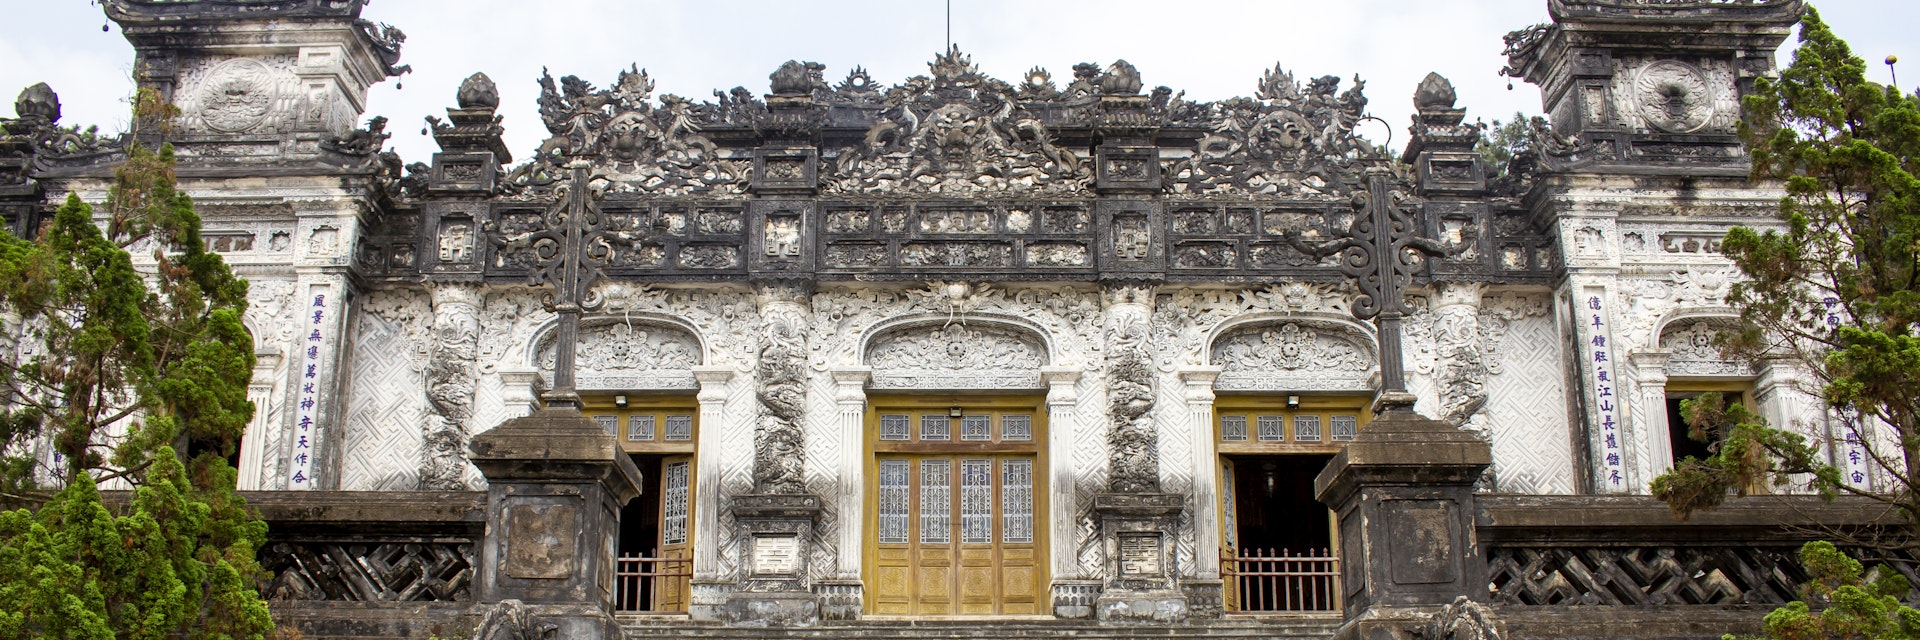 Hue, Vietnam - March 16, 2021: Hue, Vietnam - March 16, 2021: Facade View Of Tomb Of Emperor Khai Dinh. Tomb Of Emperor Khai Dinh Is A Part Of The Complex Of Hue Monuments.
1444450041
king